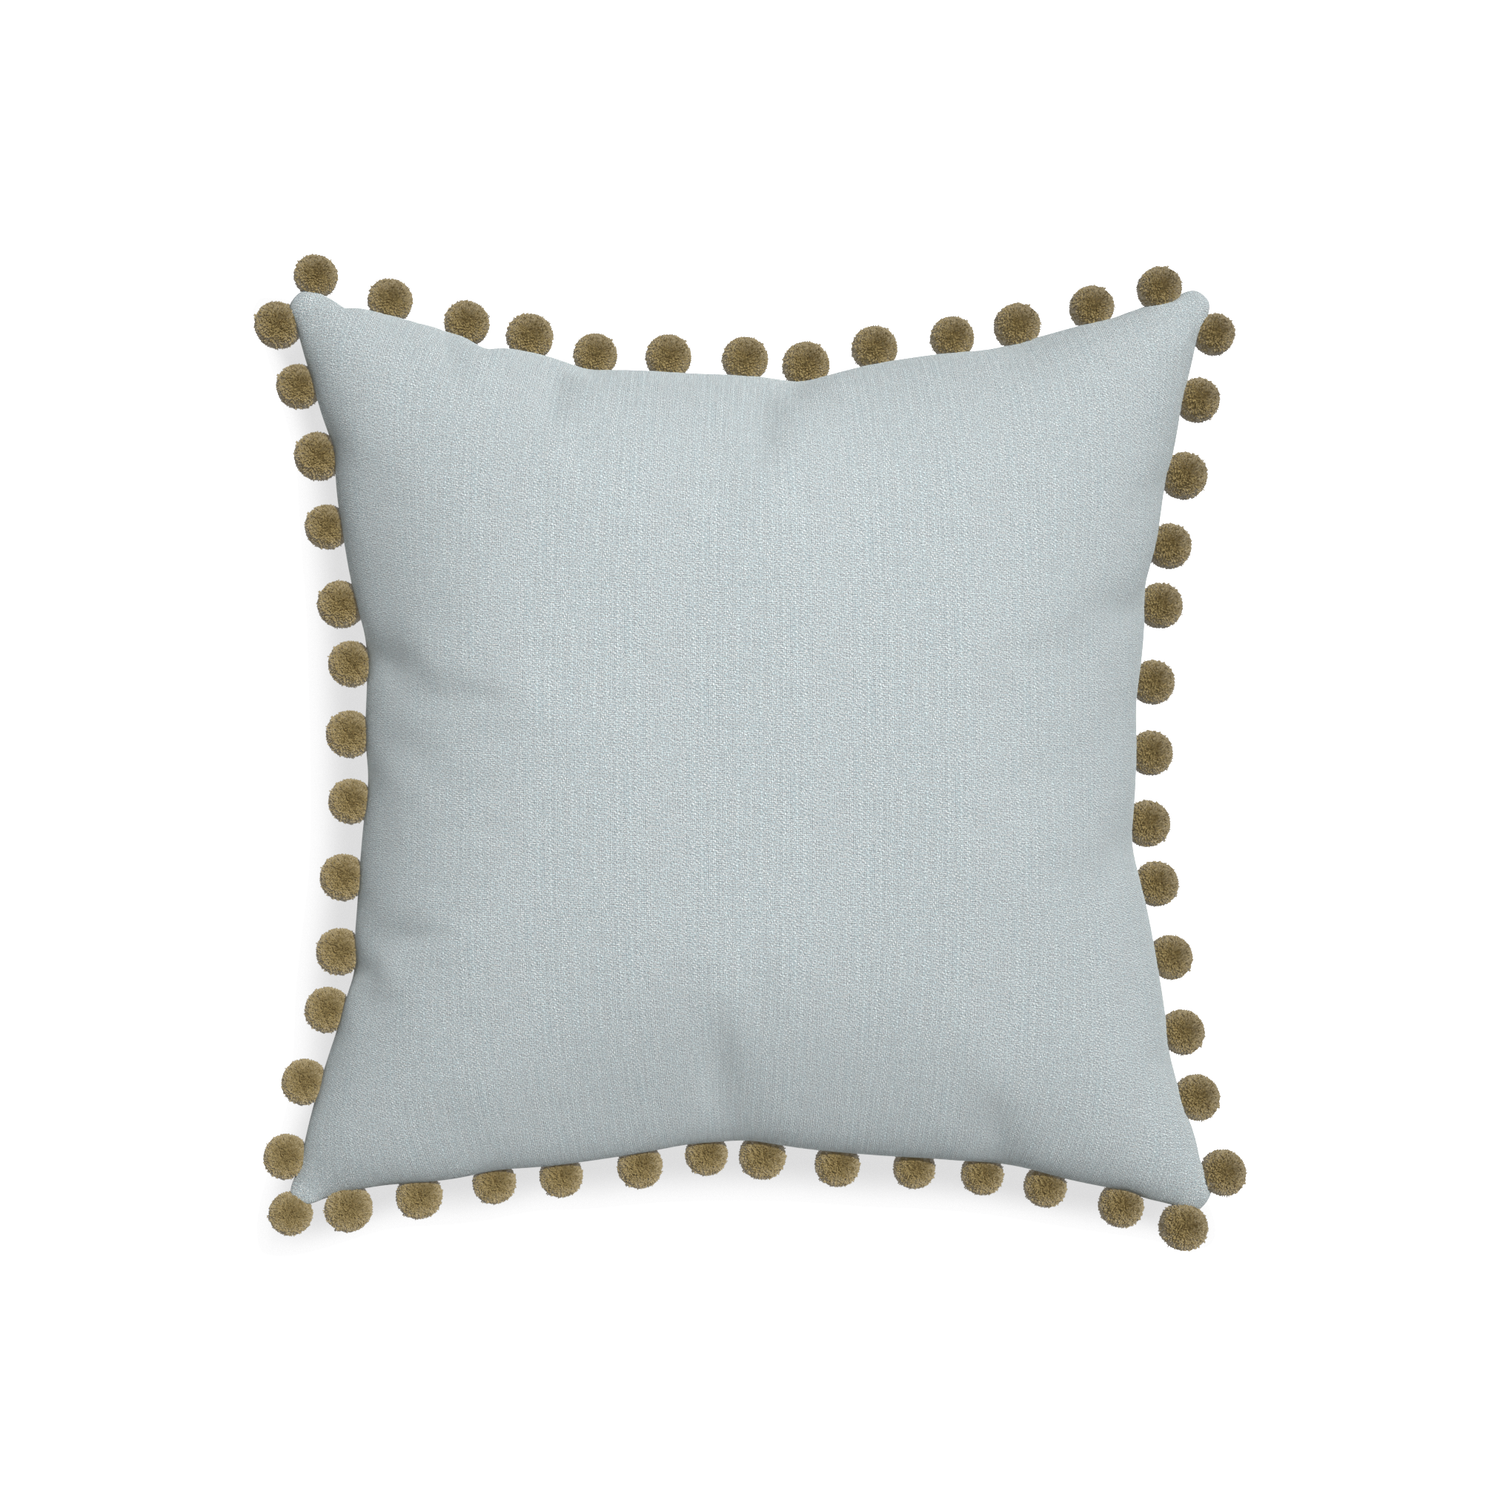 20-square sea custom grey bluepillow with olive pom pom on white background